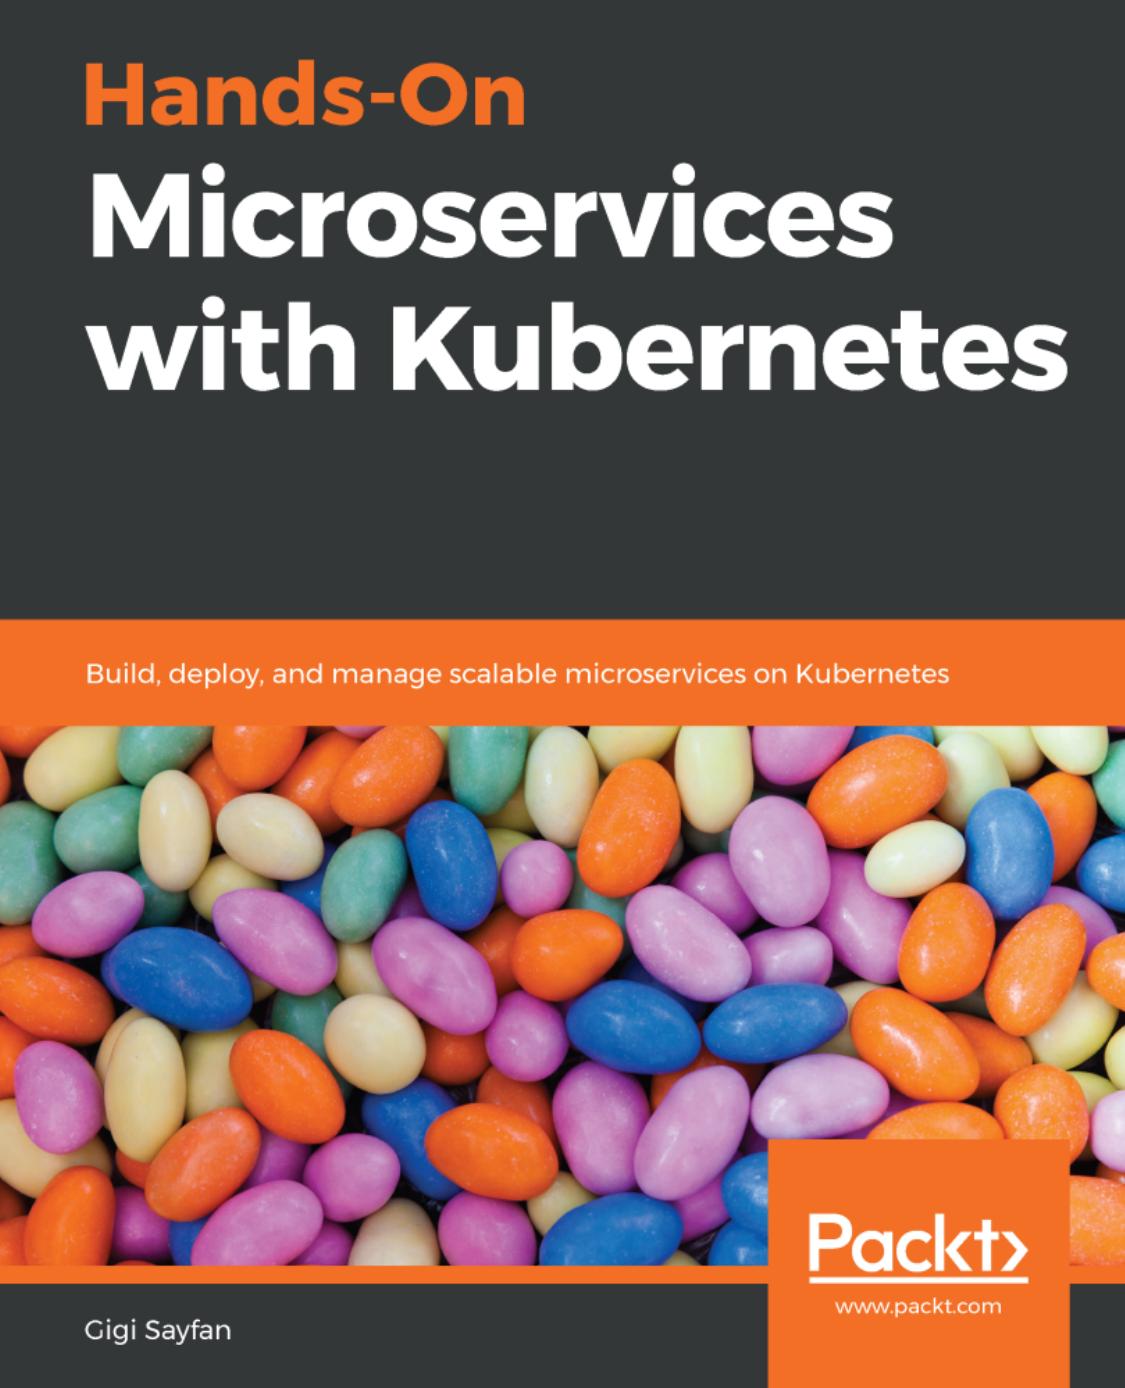 Hands-On Microservices With Kubernetes: Build, Deploy, and Manage Scalable Microservices on Kubernetes